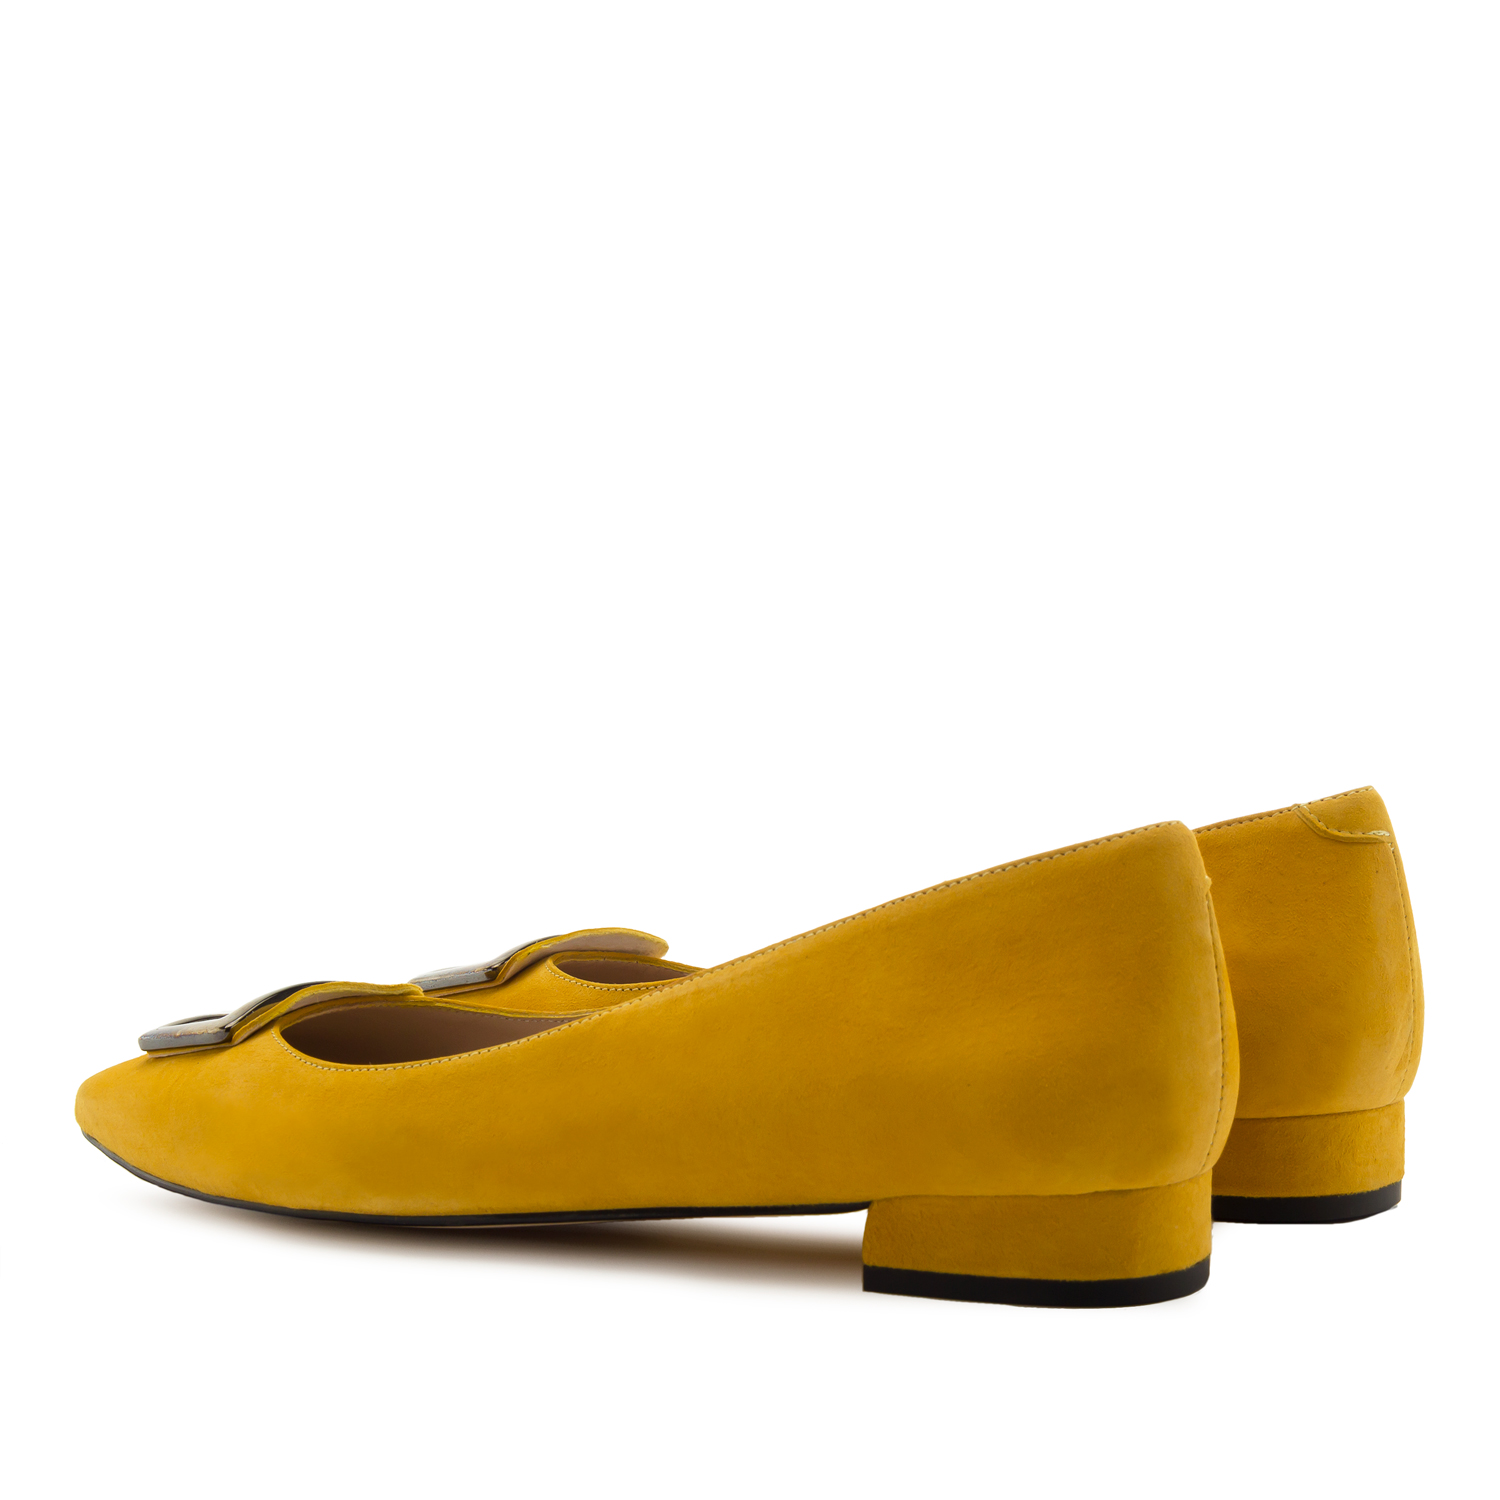 Trim Loafers in Mustard Suede Leather 